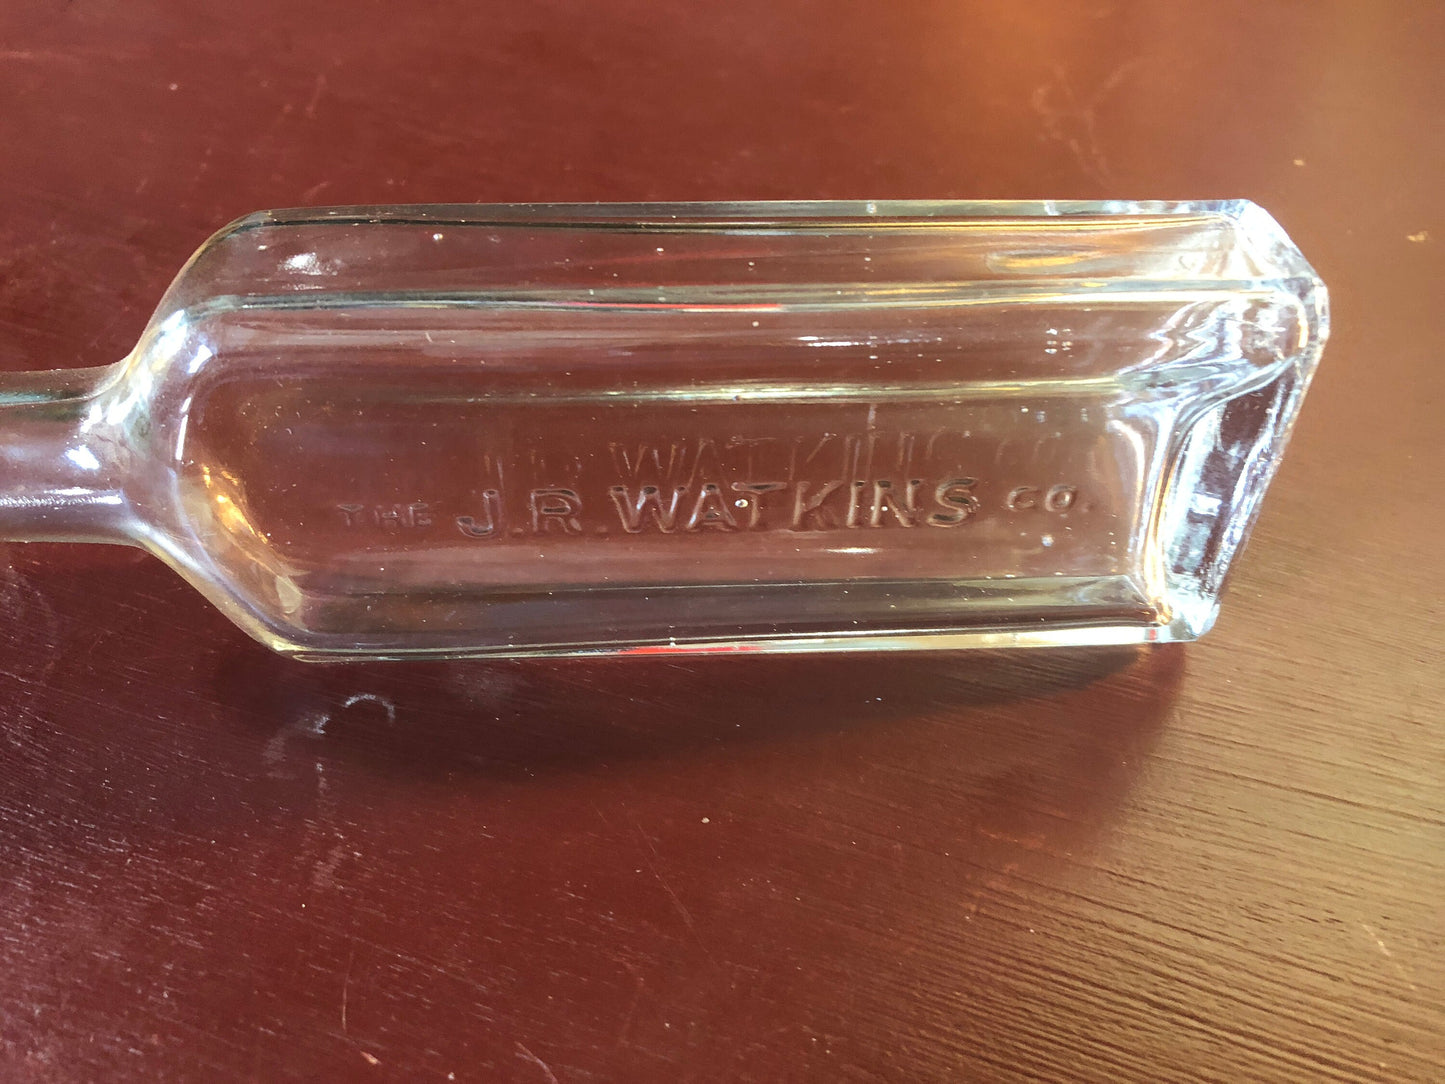 The J.R. Watkins, Vintage Collectible Clear Rectangular, Liniment Bottle with matching metal screw cap imprinted with Watkins